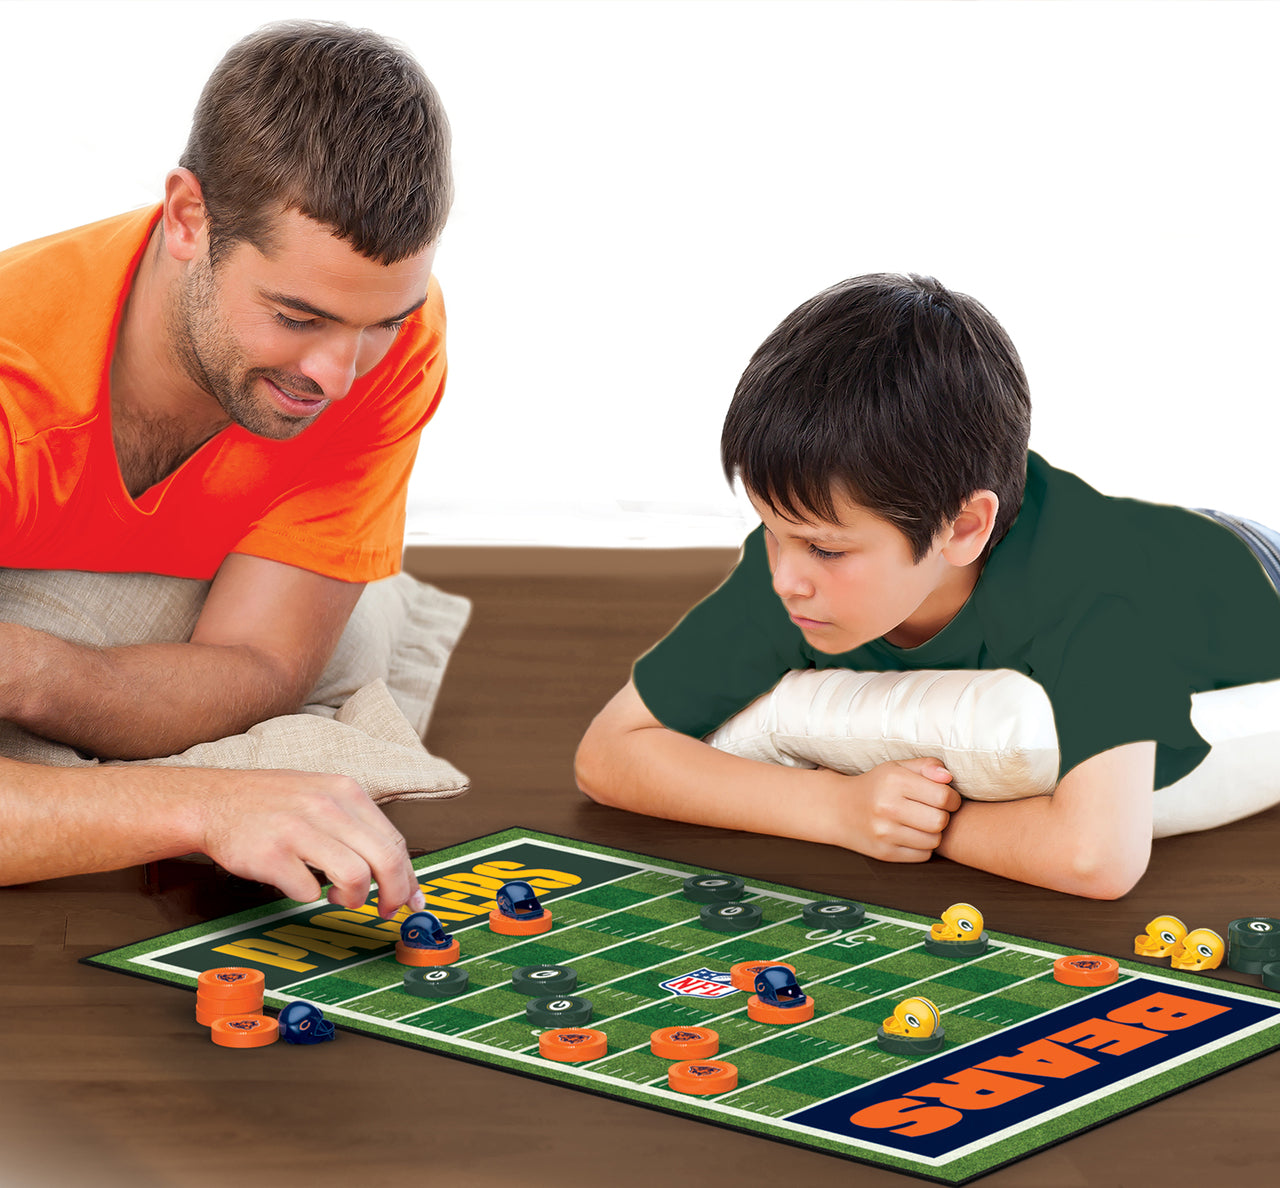 Green Bay Packers vs Chicago Bears Rivalry Checkers Board Game by Masterpieces